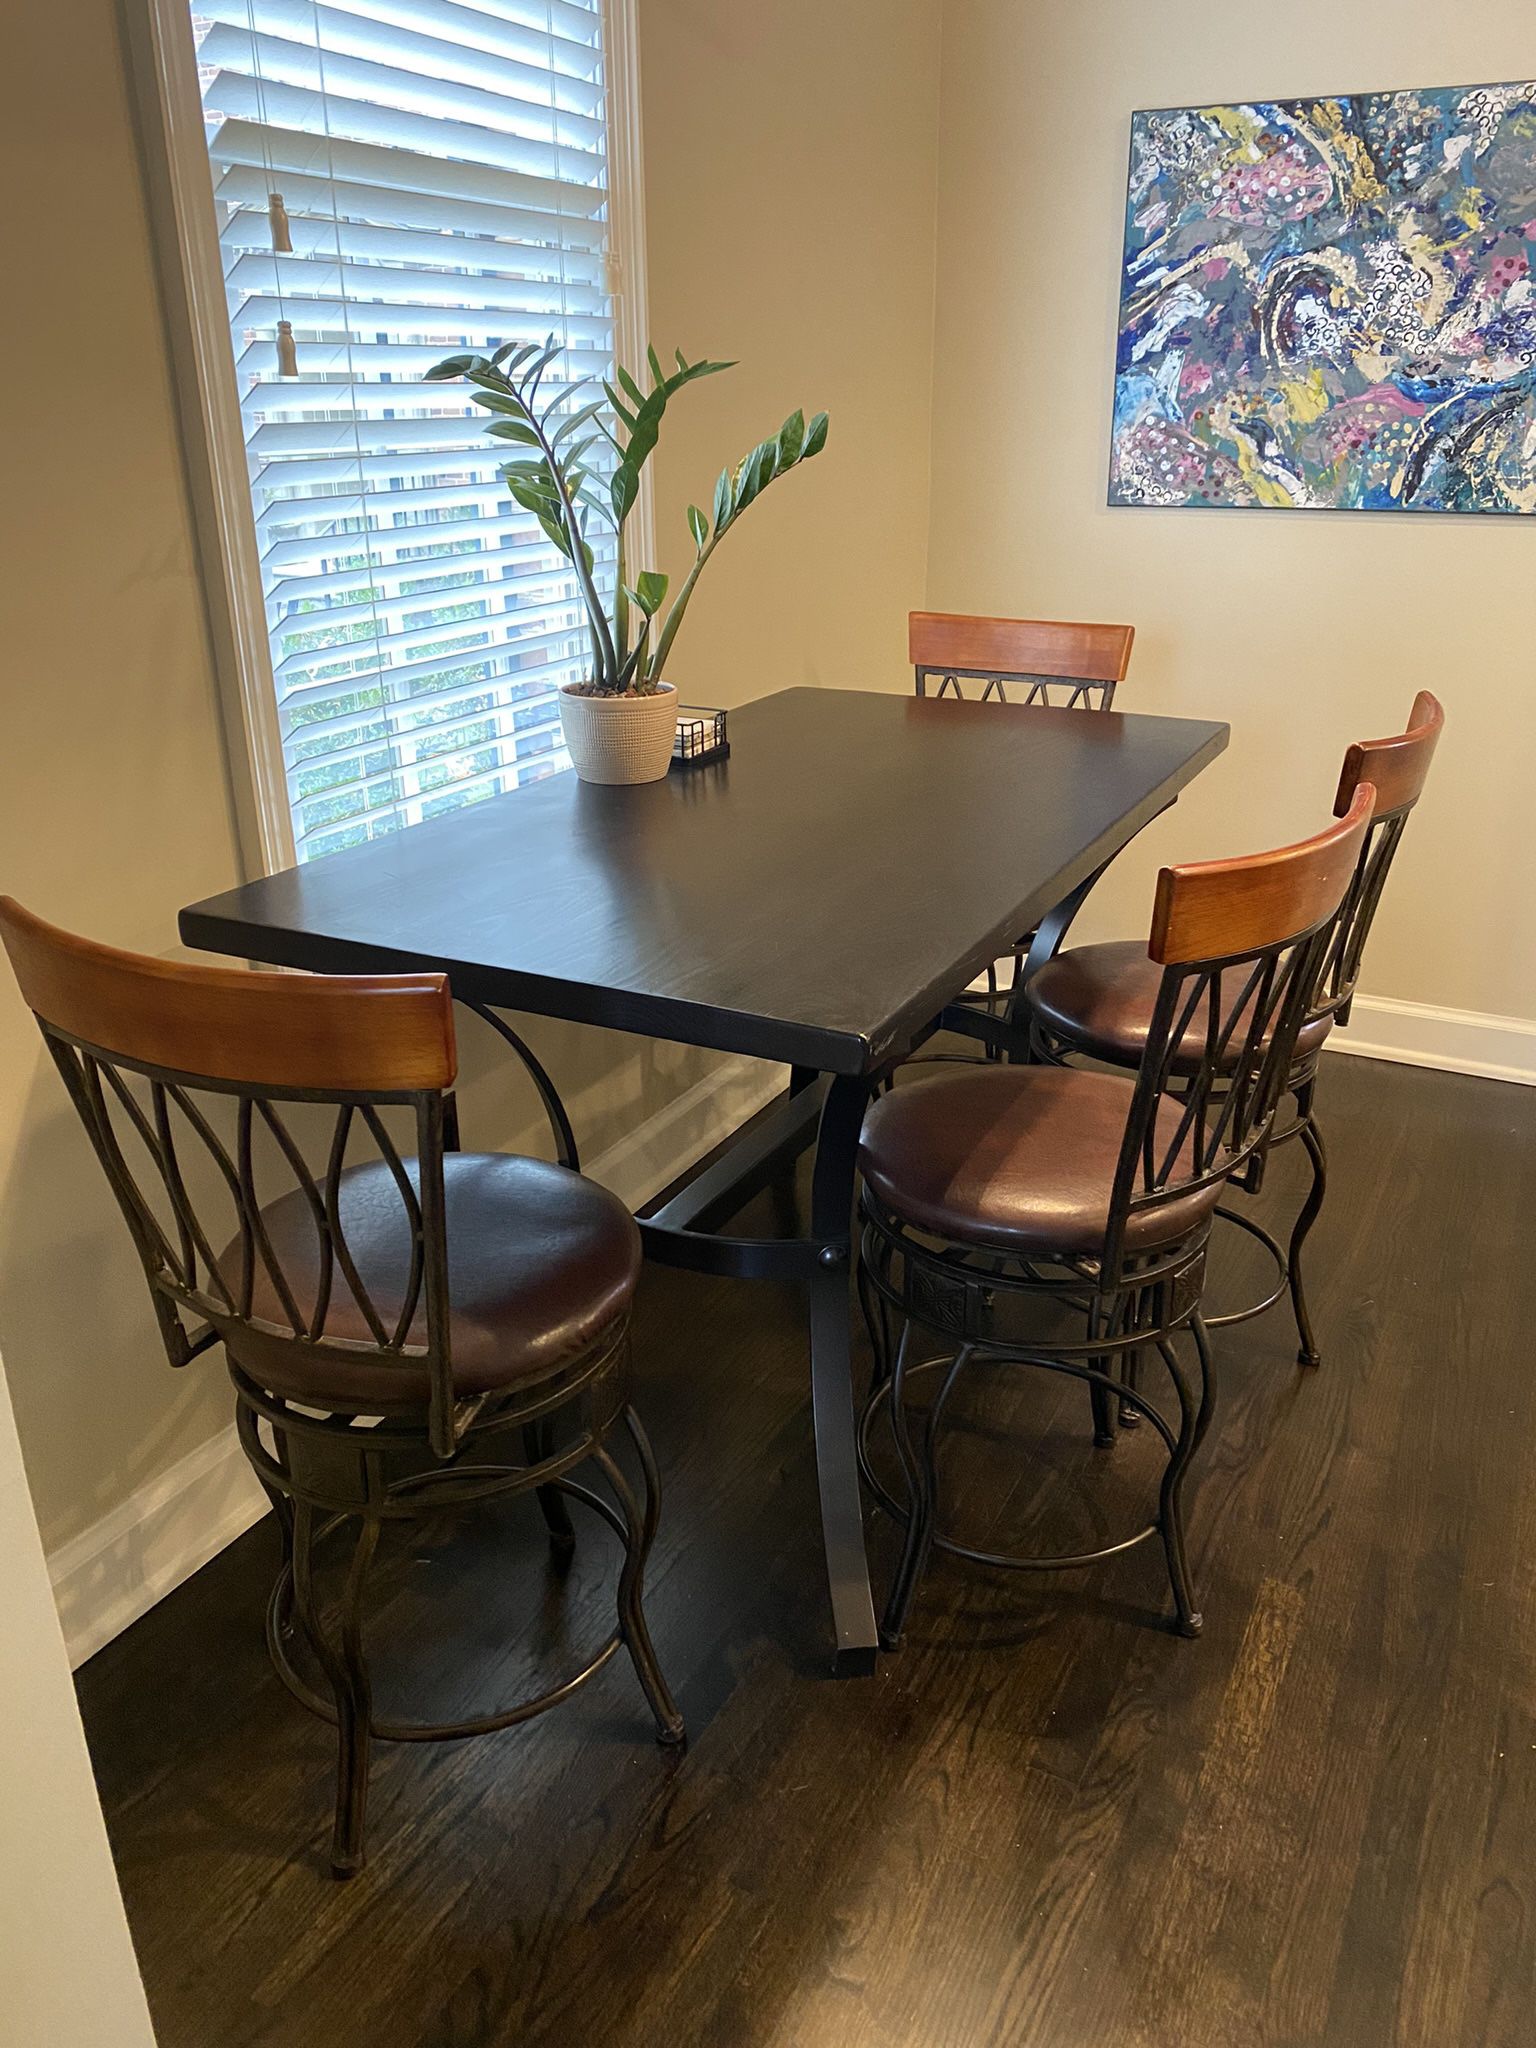 Dining Table With Four Chairs